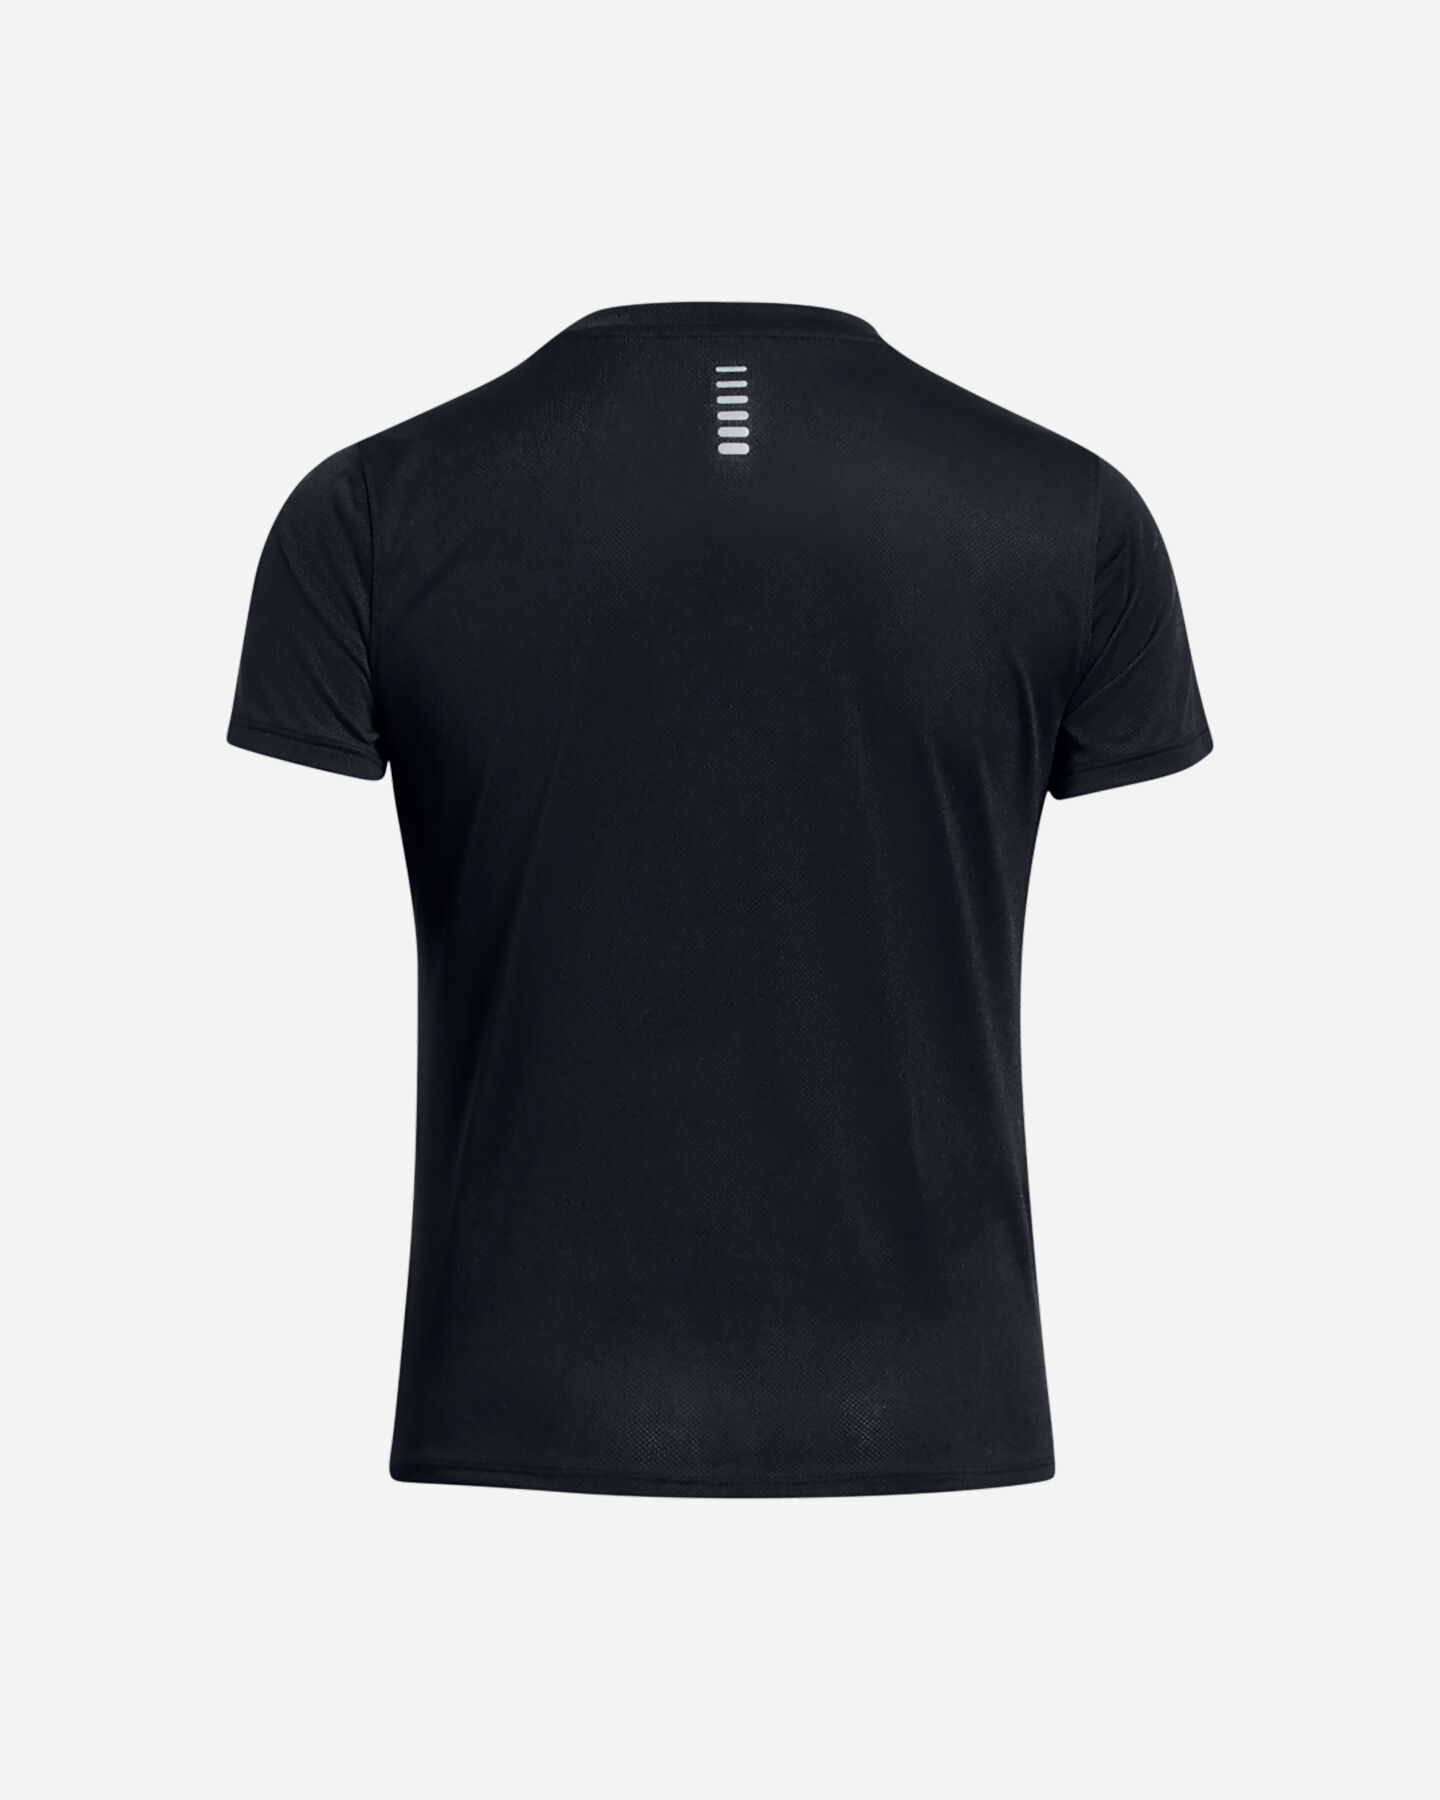  T-Shirt running UNDER ARMOUR STREAKER W S5641395|0001|XS scatto 1